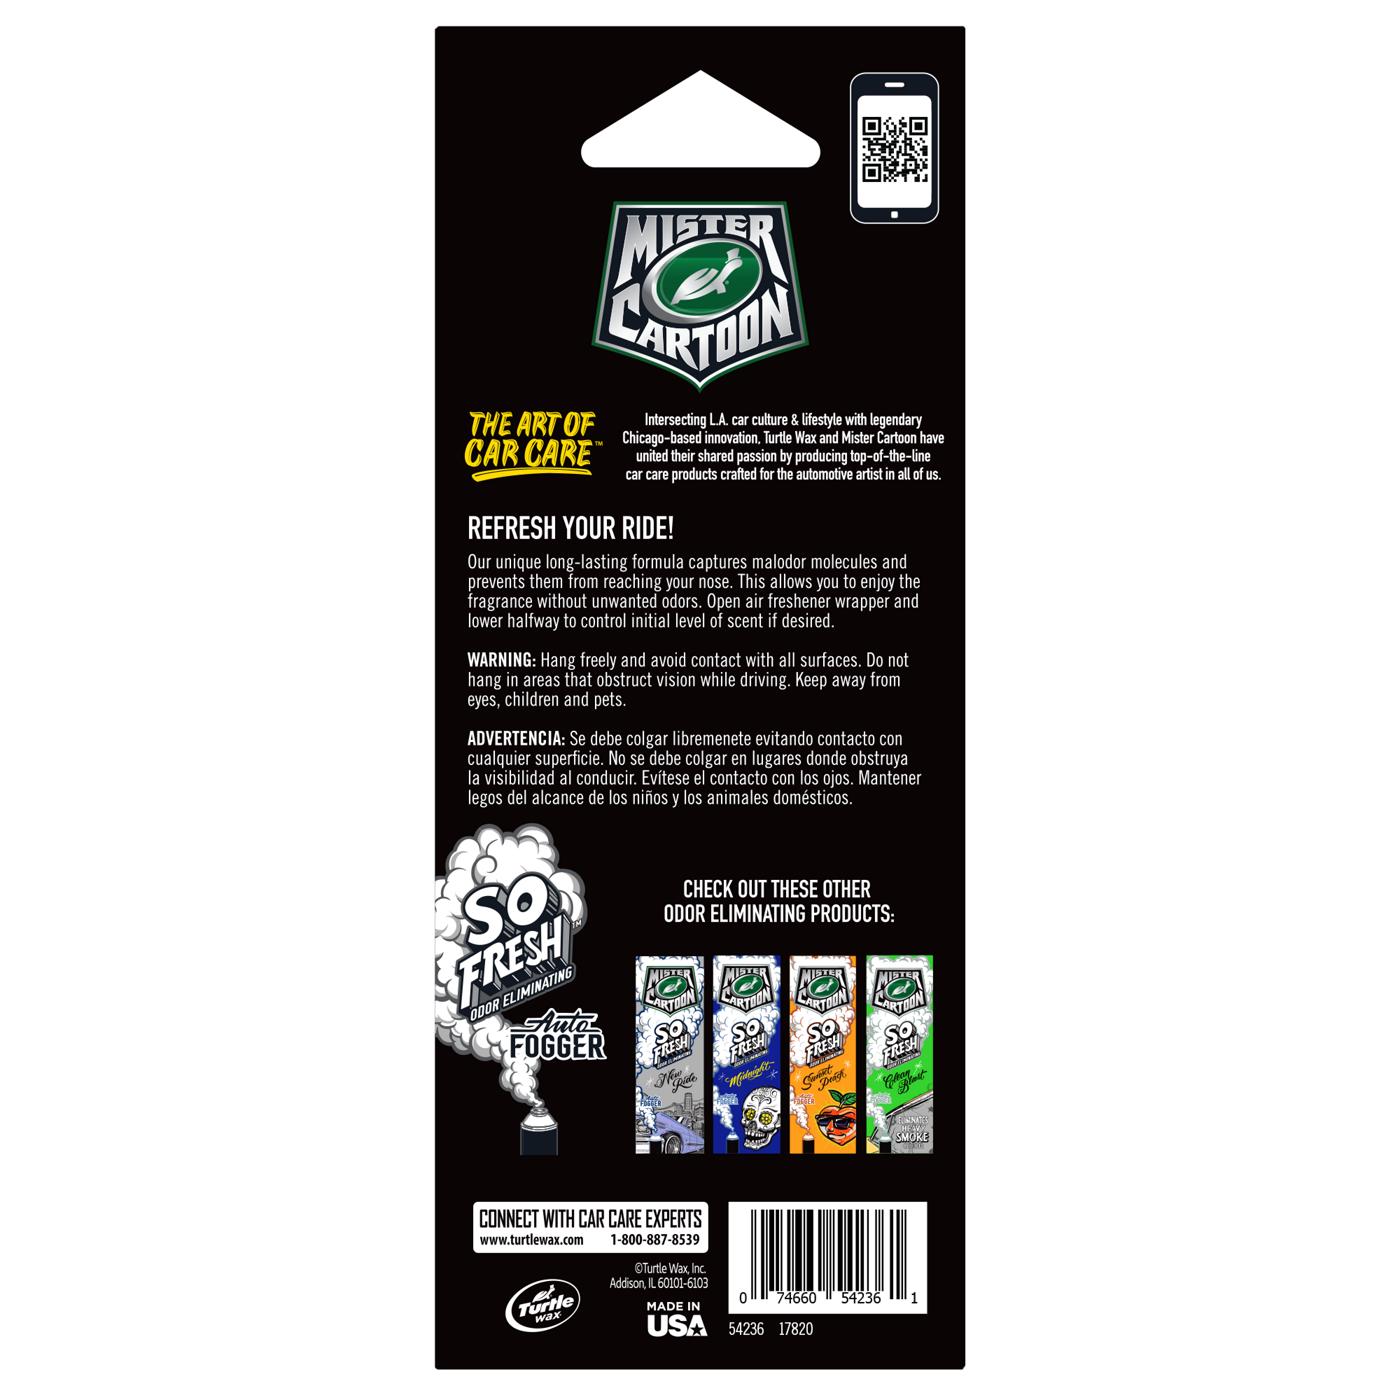 Turtle Wax Mister Cartoon Paper Air Fresheners - Dreamer; image 2 of 2